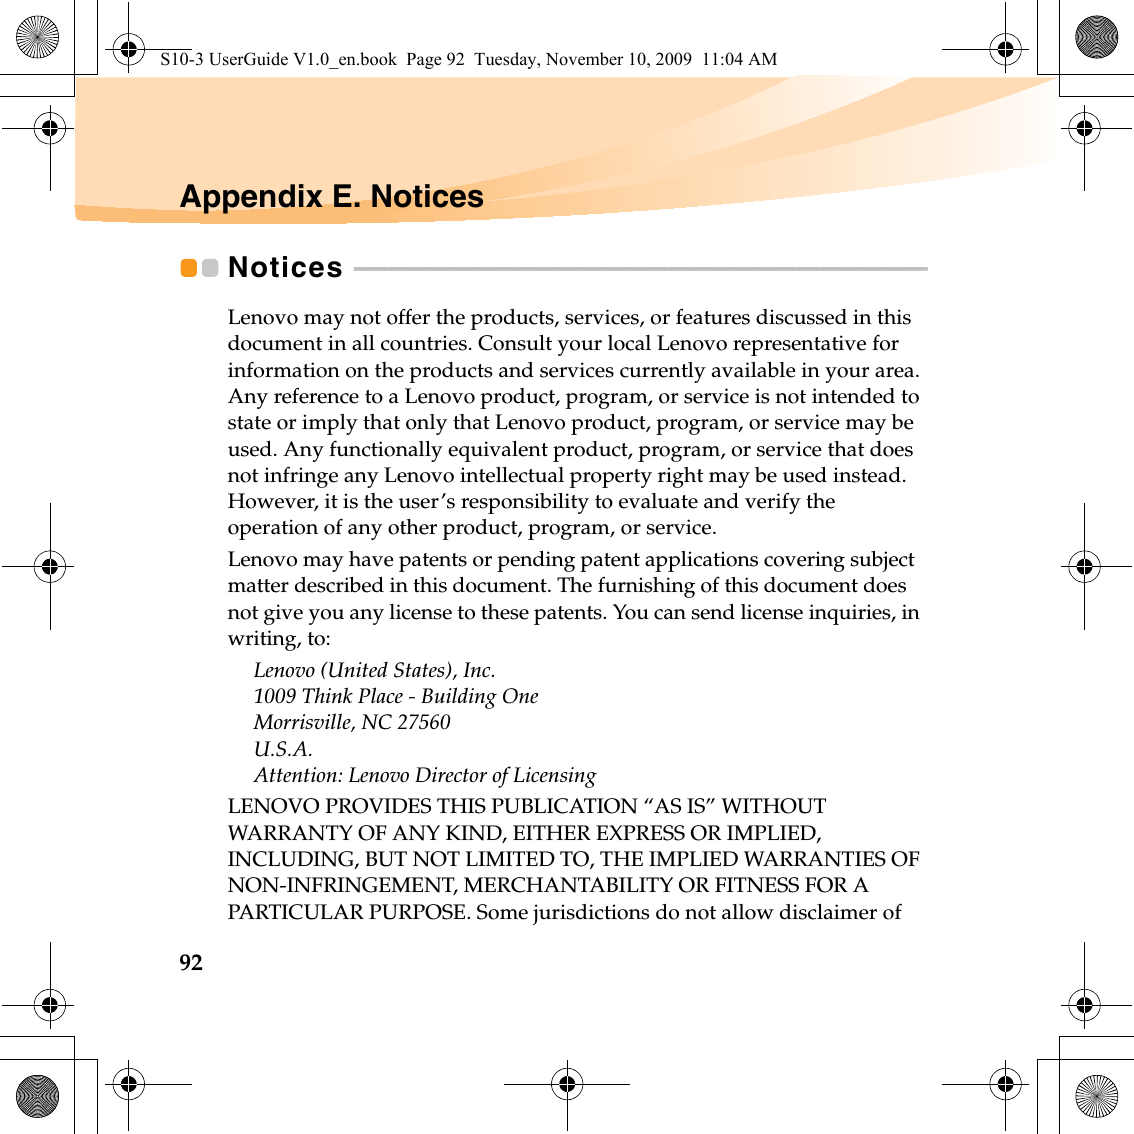 92Appendix E. NoticesNotices  - - - - - - - - - - - - - - - - - - - - - - - - - - - - - - - - - - - - - - - - - - - - - - - - - - - - - - - - - - - - - - - - - - - - - - - - - - - - - - - - - - - - - - - - - - - - - - Lenovo may not offer the products, services, or features discussed in this document in all countries. Consult your local Lenovo representative for information on the products and services currently available in your area. Any reference to a Lenovo product, program, or service is not intended to state or imply that only that Lenovo product, program, or service may be used. Any functionally equivalent product, program, or service that does not infringe any Lenovo intellectual property right may be used instead. However, it is the user’s responsibility to evaluate and verify the operation of any other product, program, or service.Lenovo may have patents or pending patent applications covering subject matter described in this document. The furnishing of this document does not give you any license to these patents. You can send license inquiries, in writing, to:Lenovo (United States), Inc. 1009 Think Place - Building One Morrisville, NC 27560 U.S.A.Attention: Lenovo Director of LicensingLENOVO PROVIDES THIS PUBLICATION “AS IS” WITHOUT WARRANTY OF ANY KIND, EITHER EXPRESS OR IMPLIED, INCLUDING, BUT NOT LIMITED TO, THE IMPLIED WARRANTIES OF NON-INFRINGEMENT, MERCHANTABILITY OR FITNESS FOR A PARTICULAR PURPOSE. Some jurisdictions do not allow disclaimer of S10-3 UserGuide V1.0_en.book  Page 92  Tuesday, November 10, 2009  11:04 AM